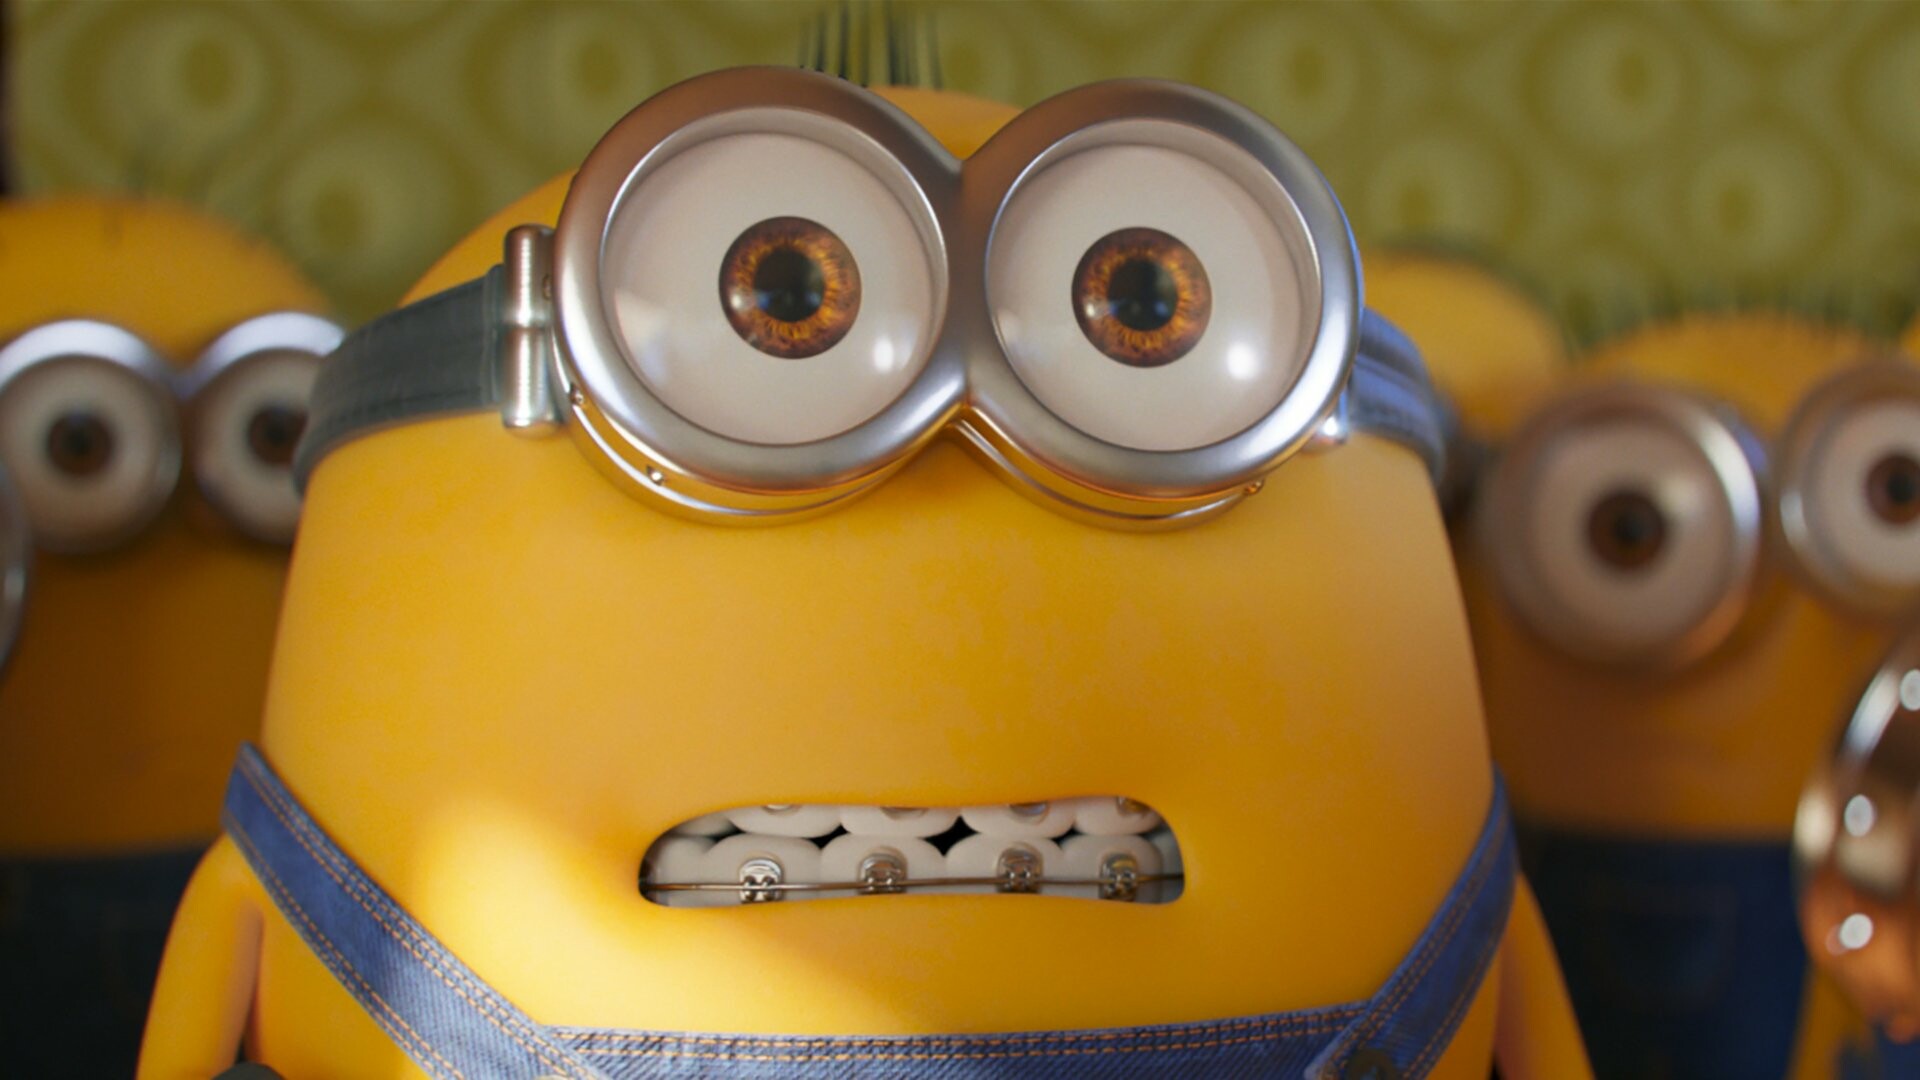 Minions: The Rise of Gru: Fictional yellow creatures, Bob. 1920x1080 Full HD Background.